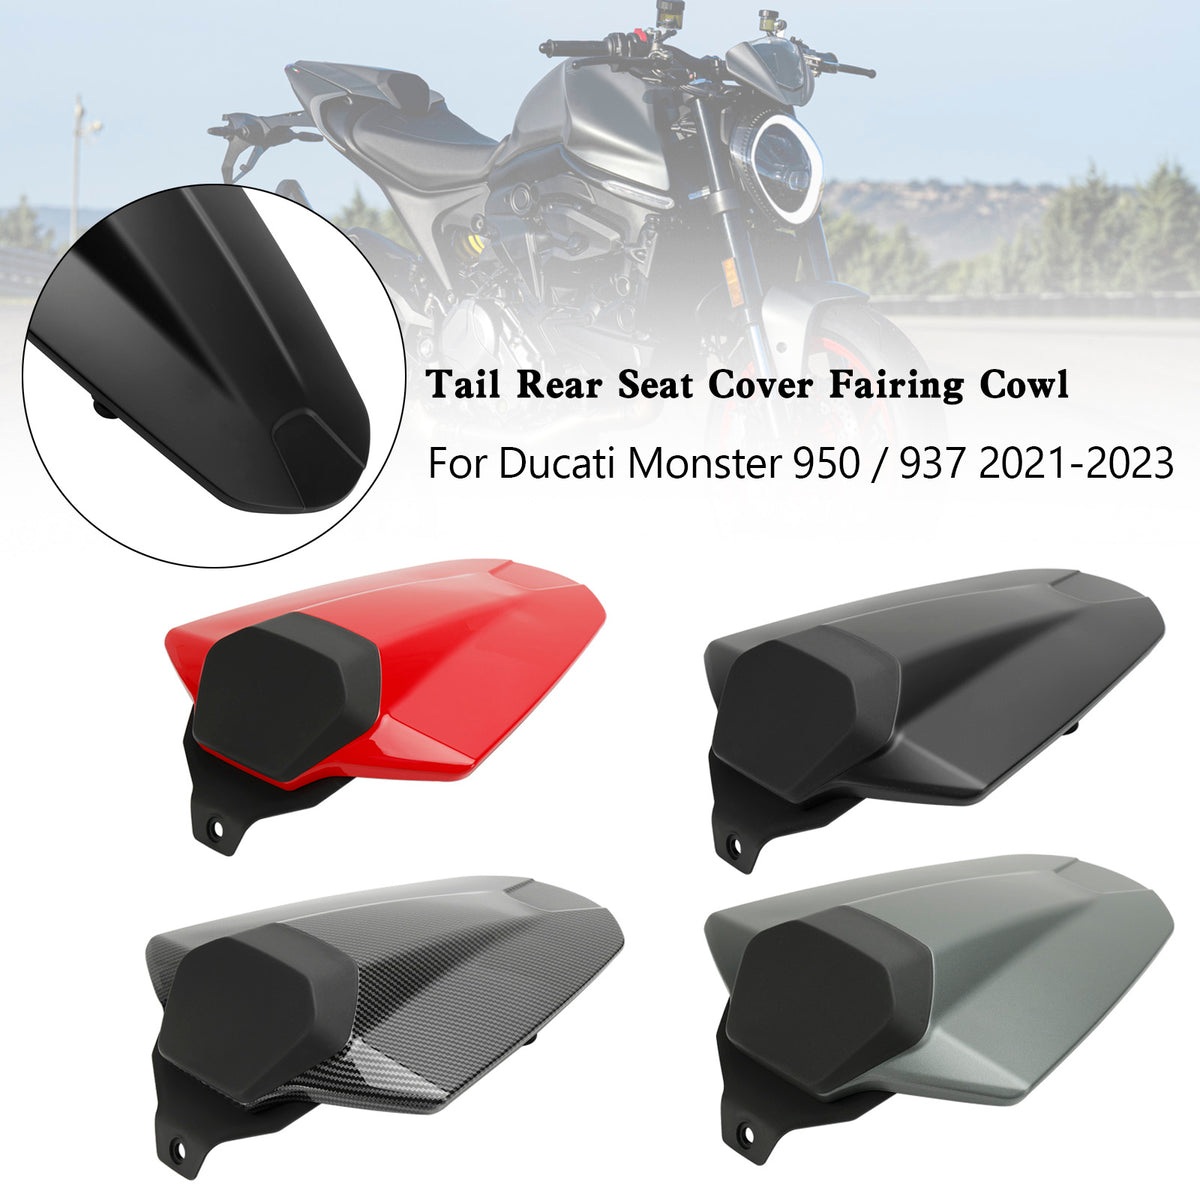 2021-2023 Ducati Monster 950 937 Tail Rear Seat Cover Fairing Cowl